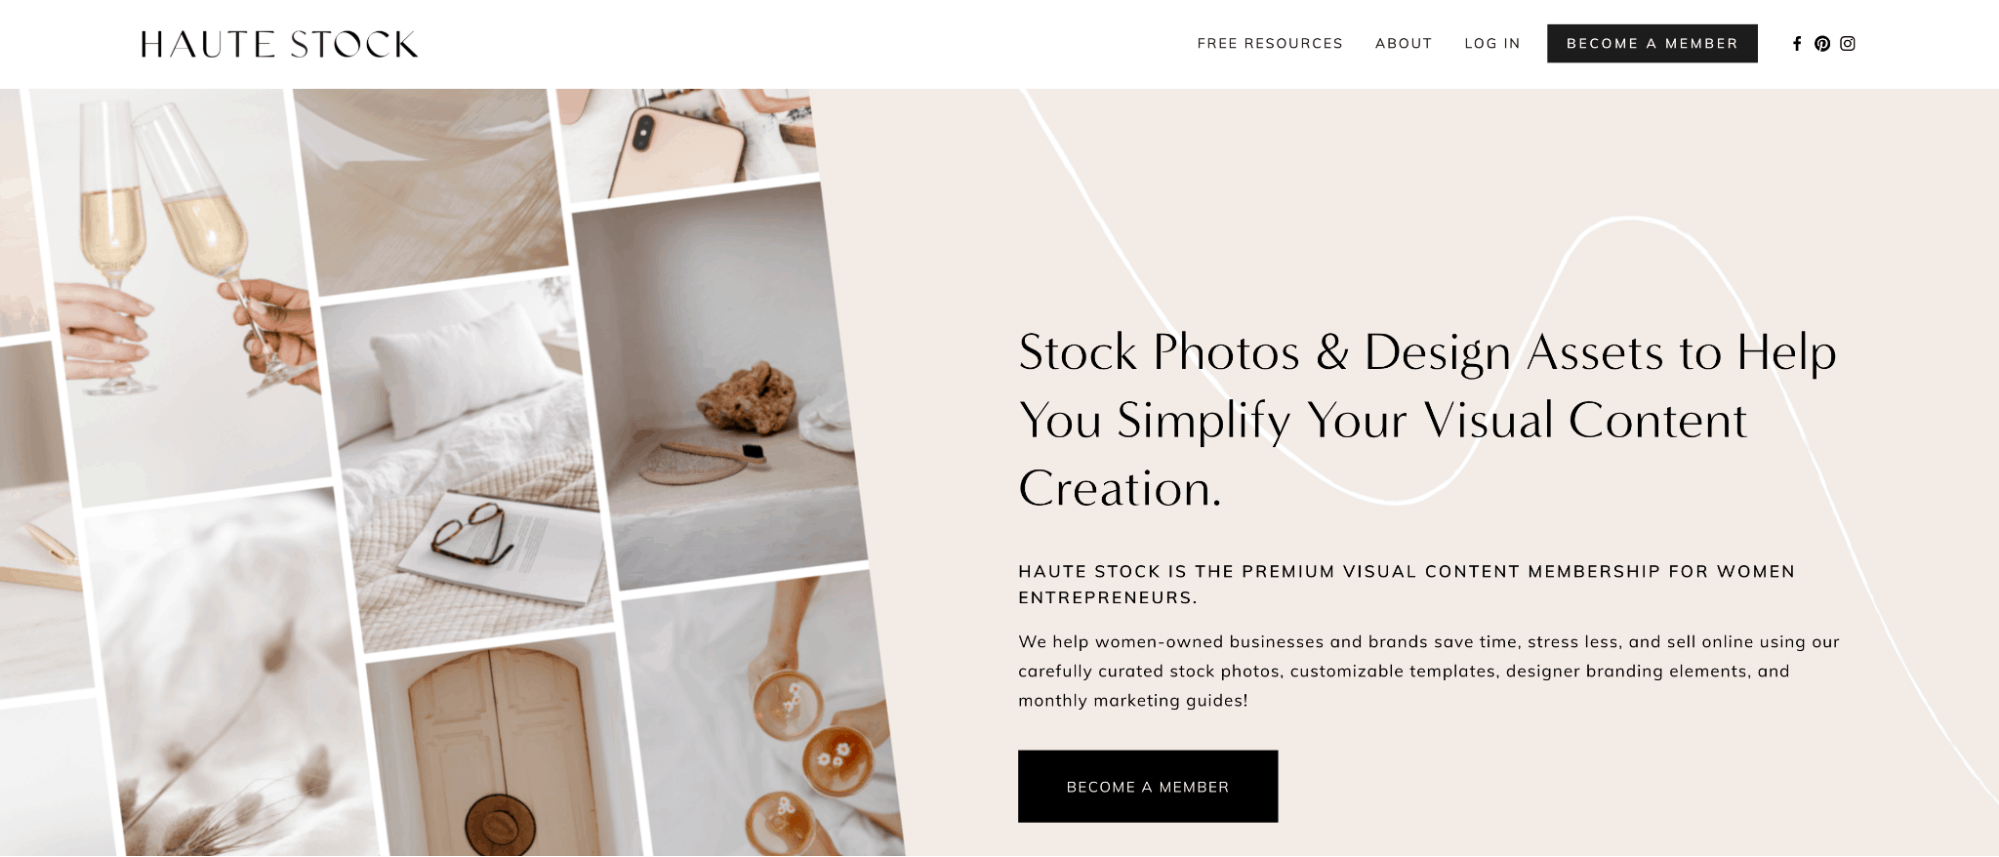 Haute Stock home page